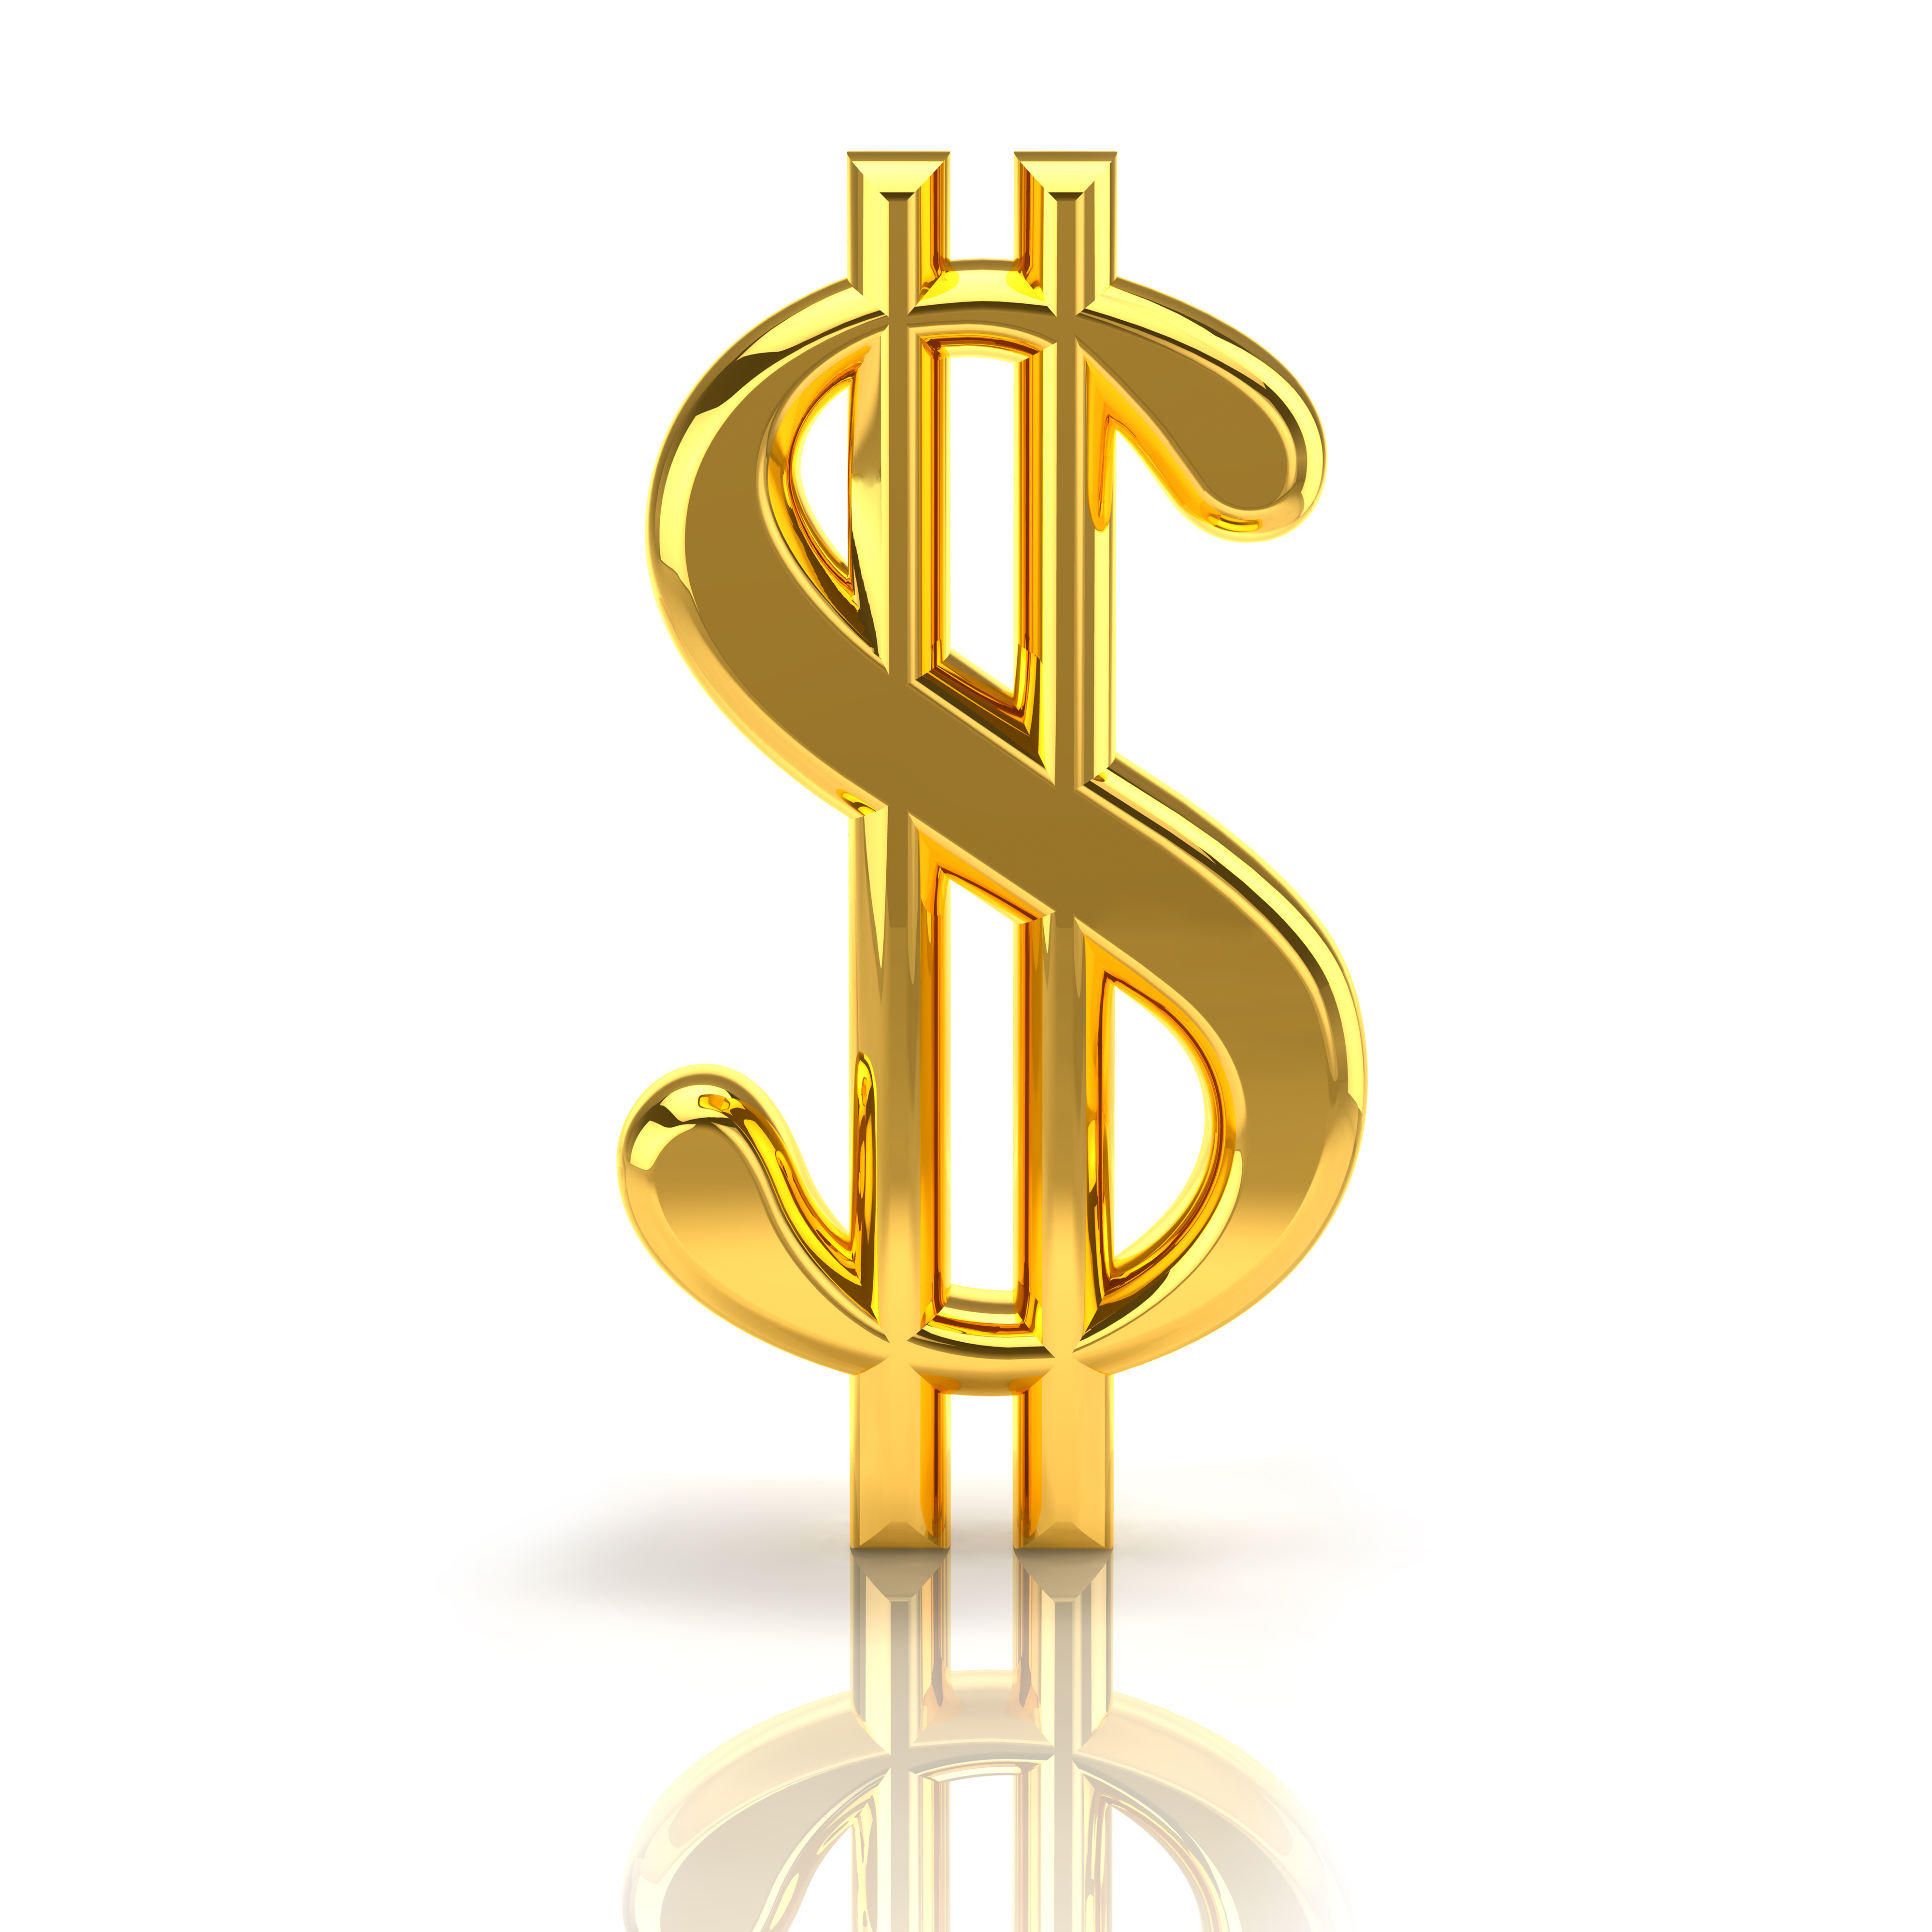 Dollar Sign Pic - ClipArt Best